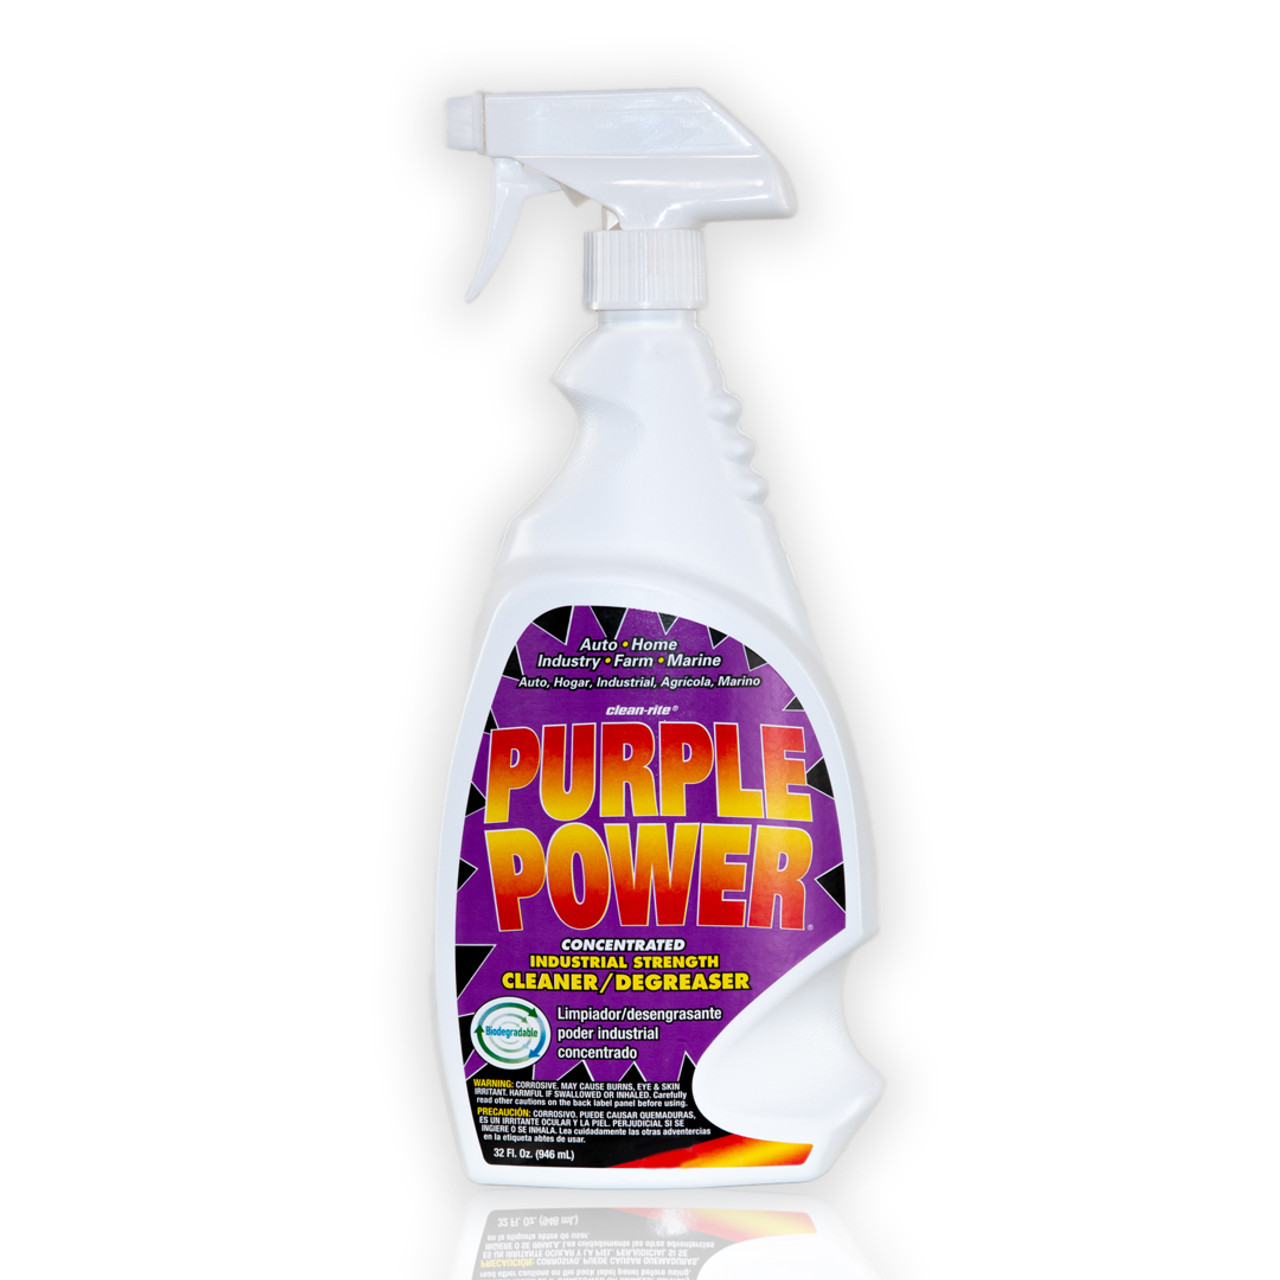 Purple Power Concentrated Industrial Cleaner/Degreaser - Pack of 5